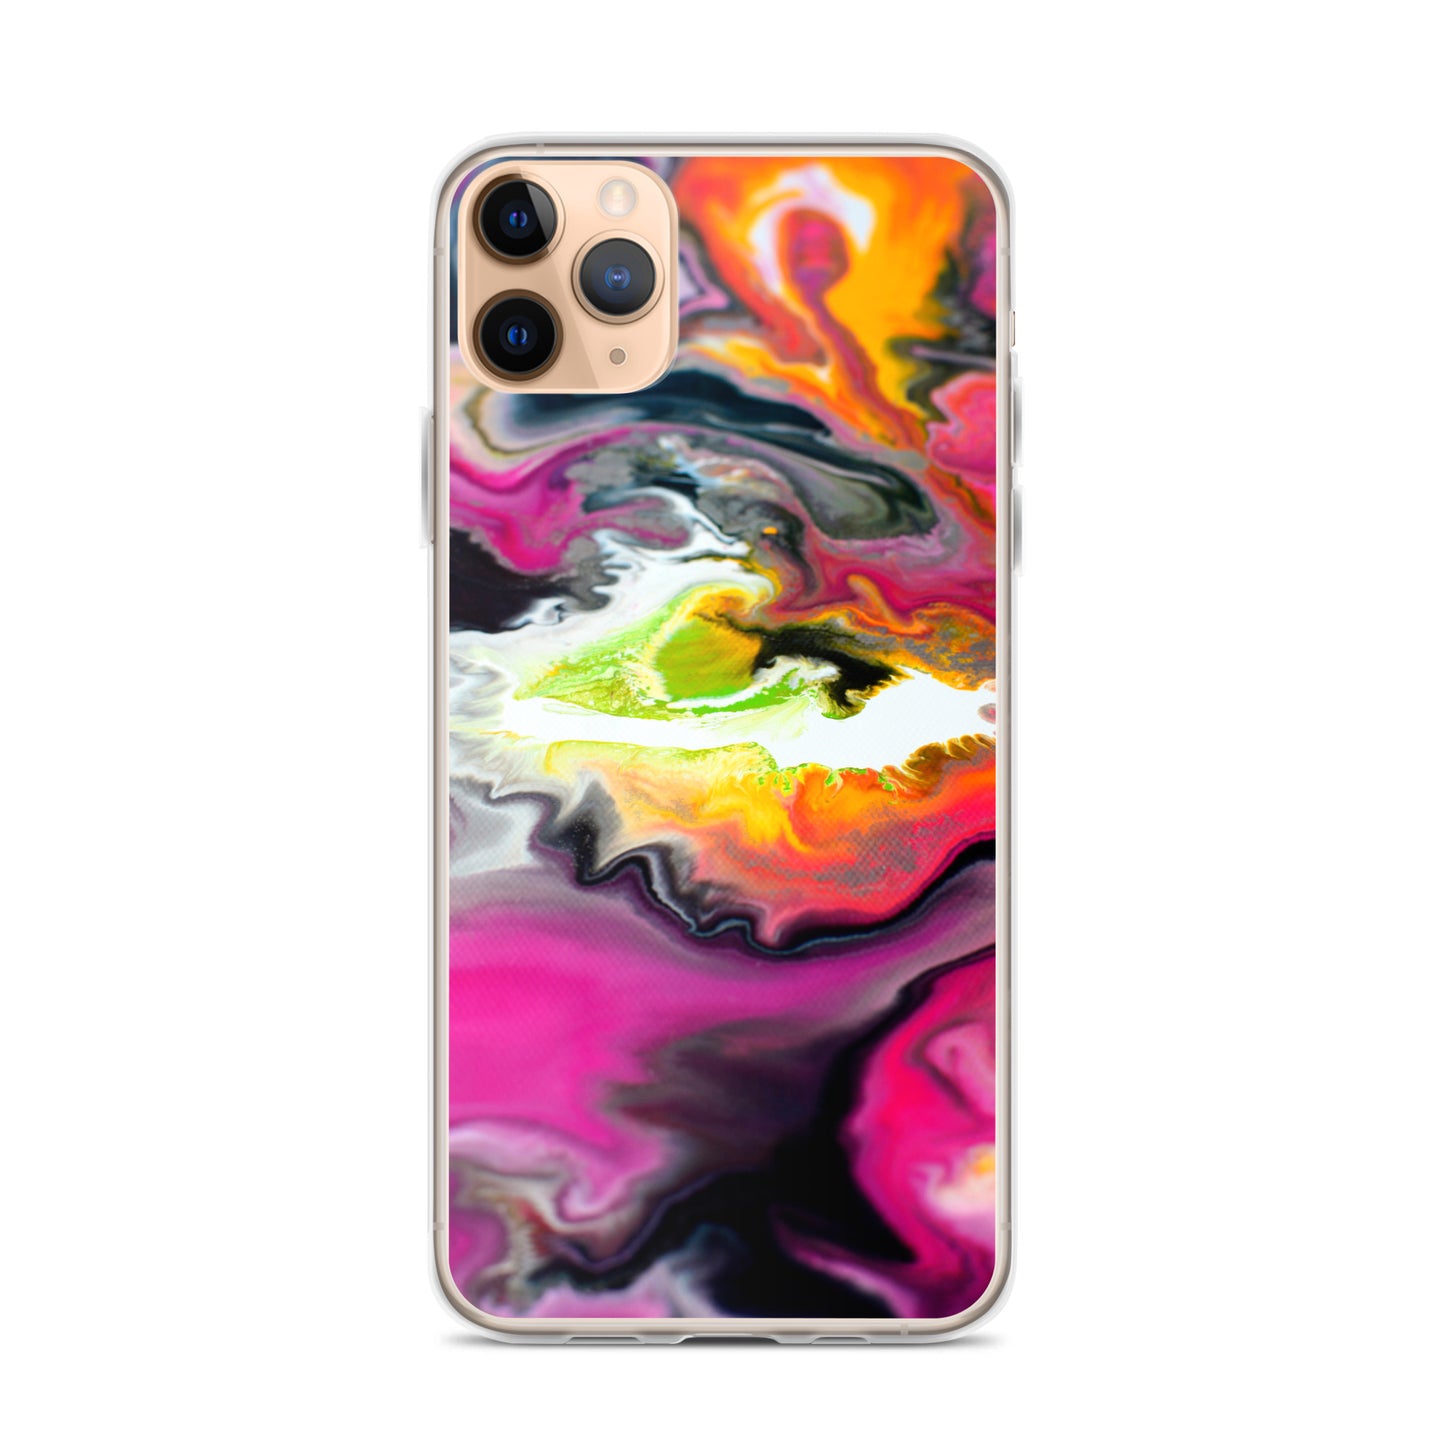 iPhone Case - Pink and yellow design